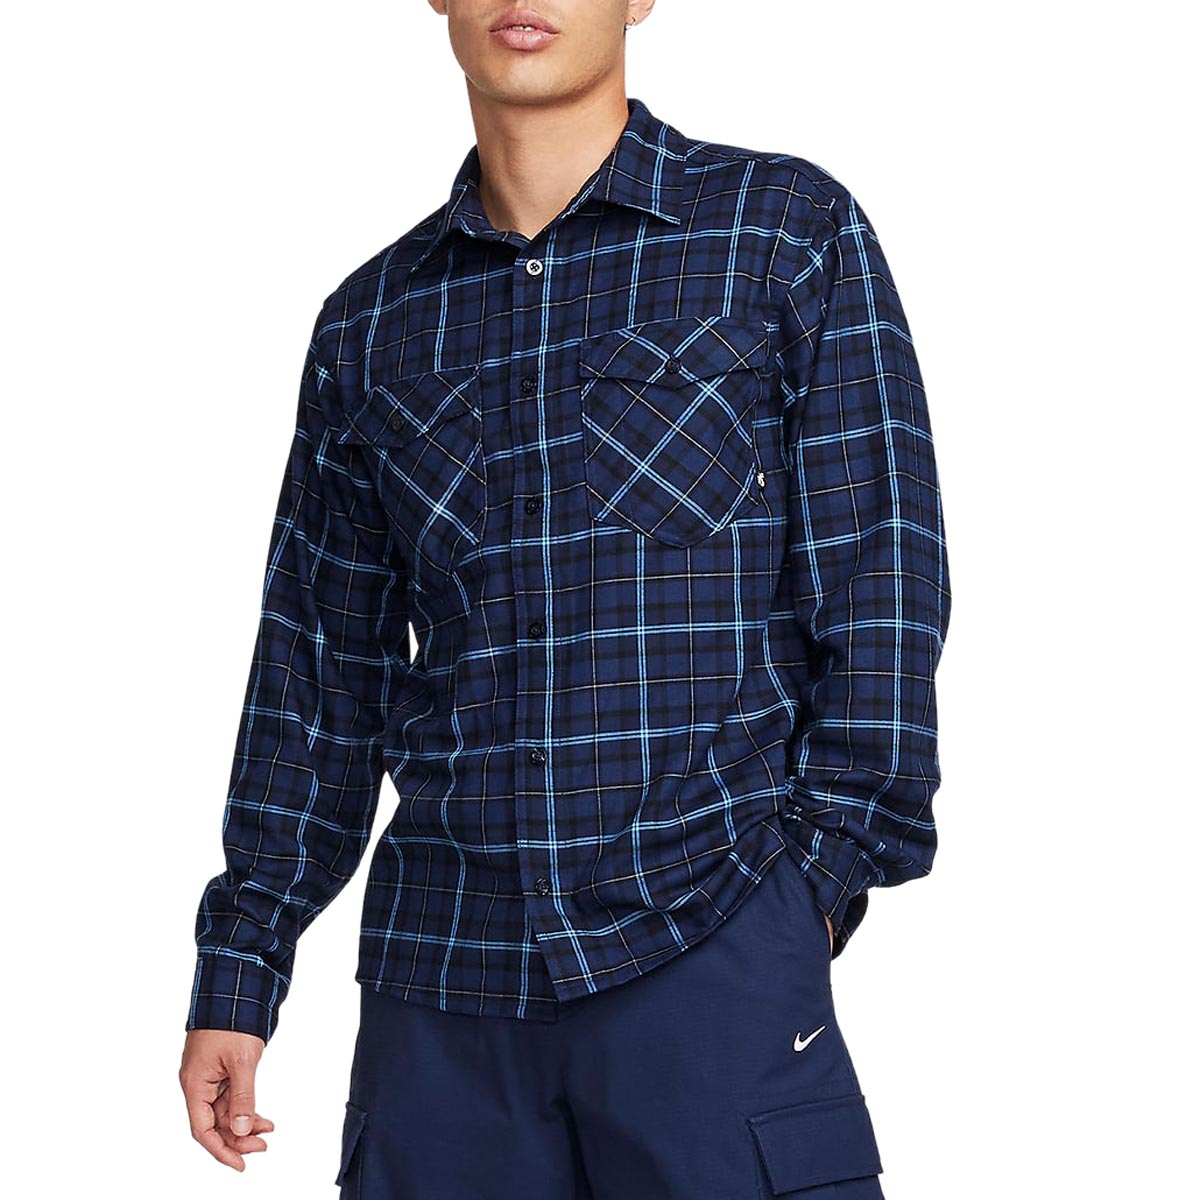 Nike SB Flannel Skate Button Up Shirt - Midnight Navy/Obsidian image 4